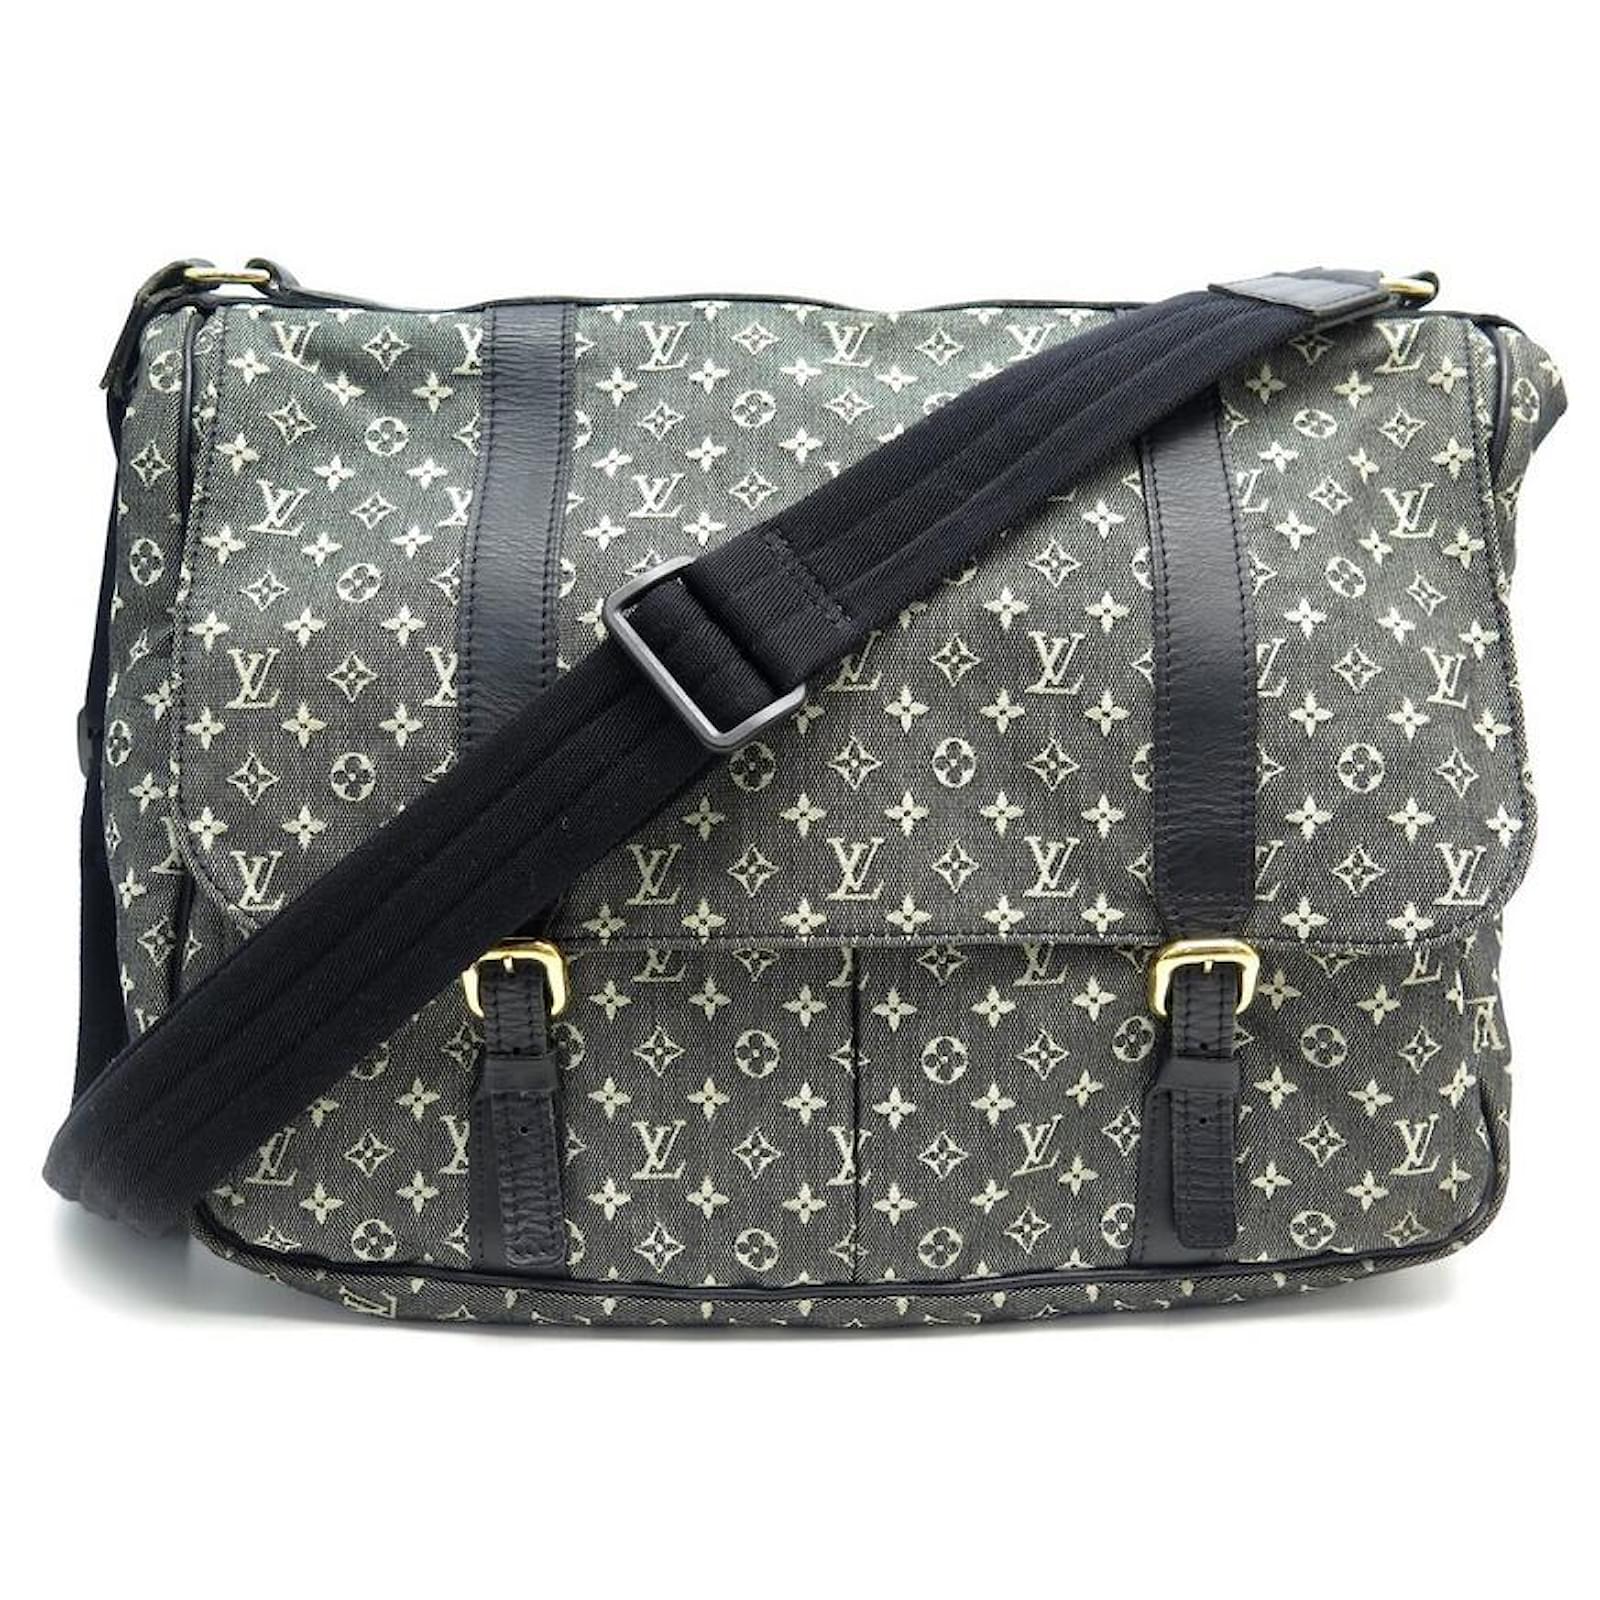 How I Turned My Luxury Bag into a Diaper Bag Louis Vuitton Highlight   ToteSavvy